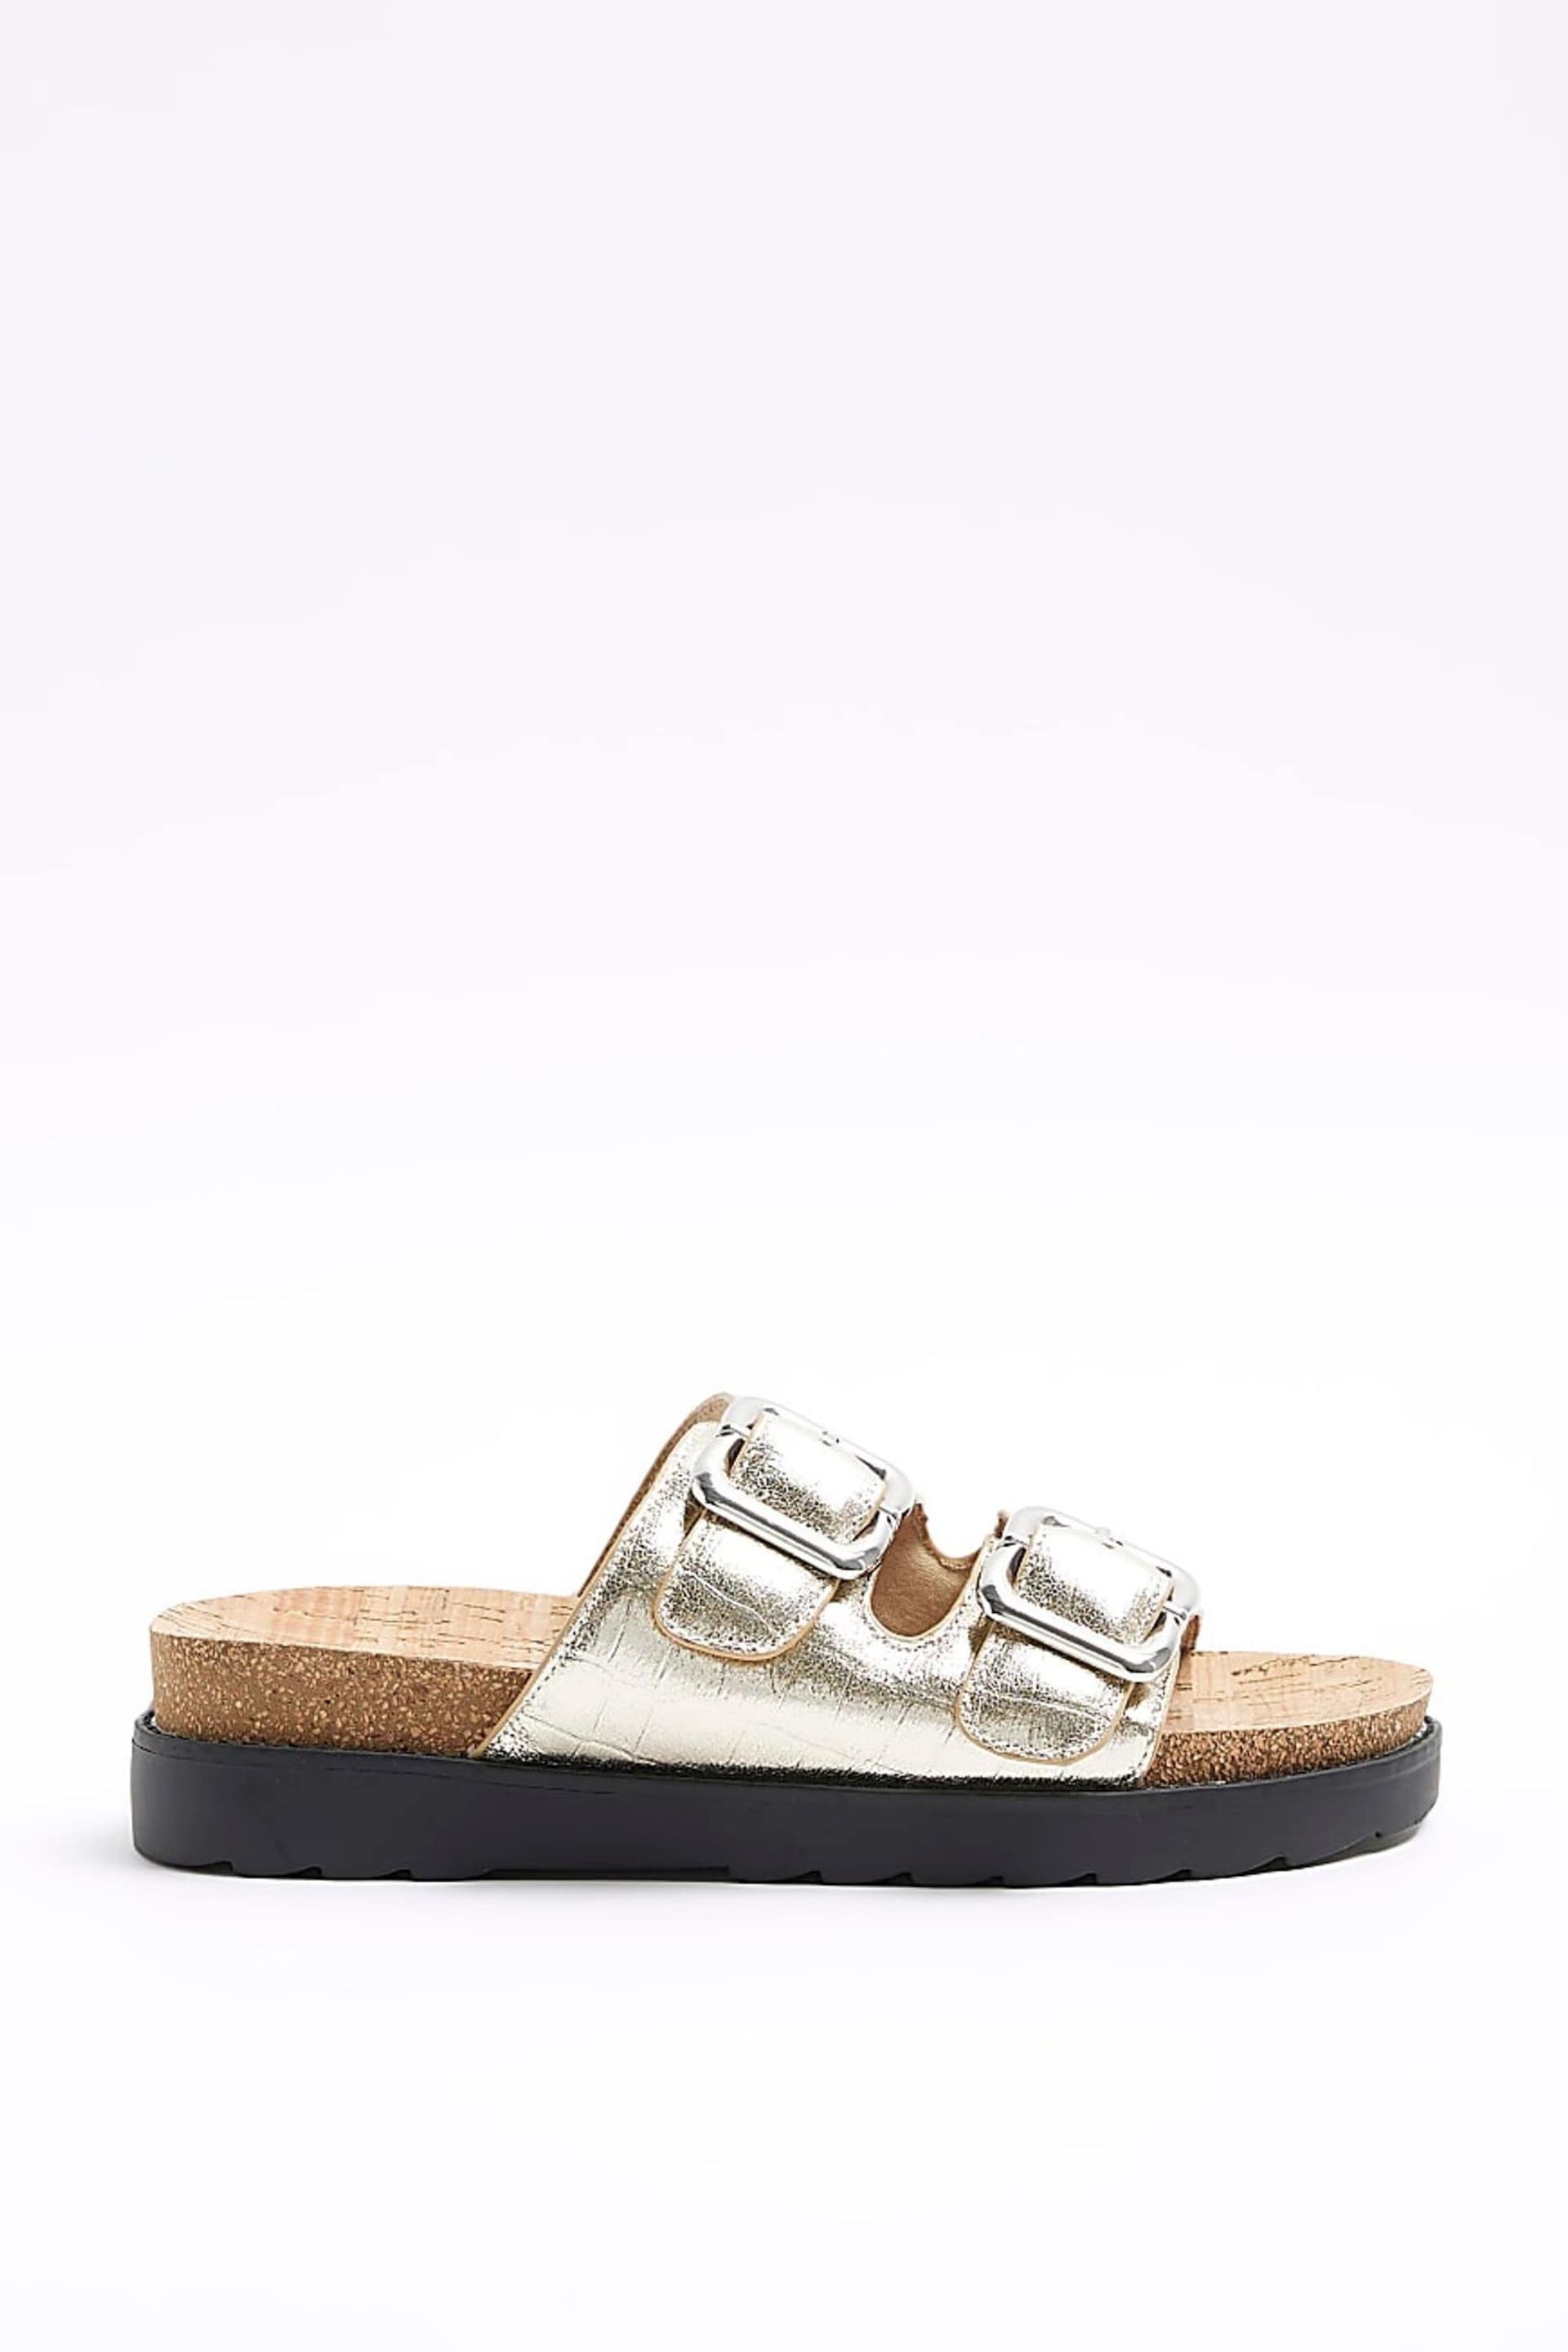 River Island Gold Leopard Double Buckle Sandals - Image 2 of 6